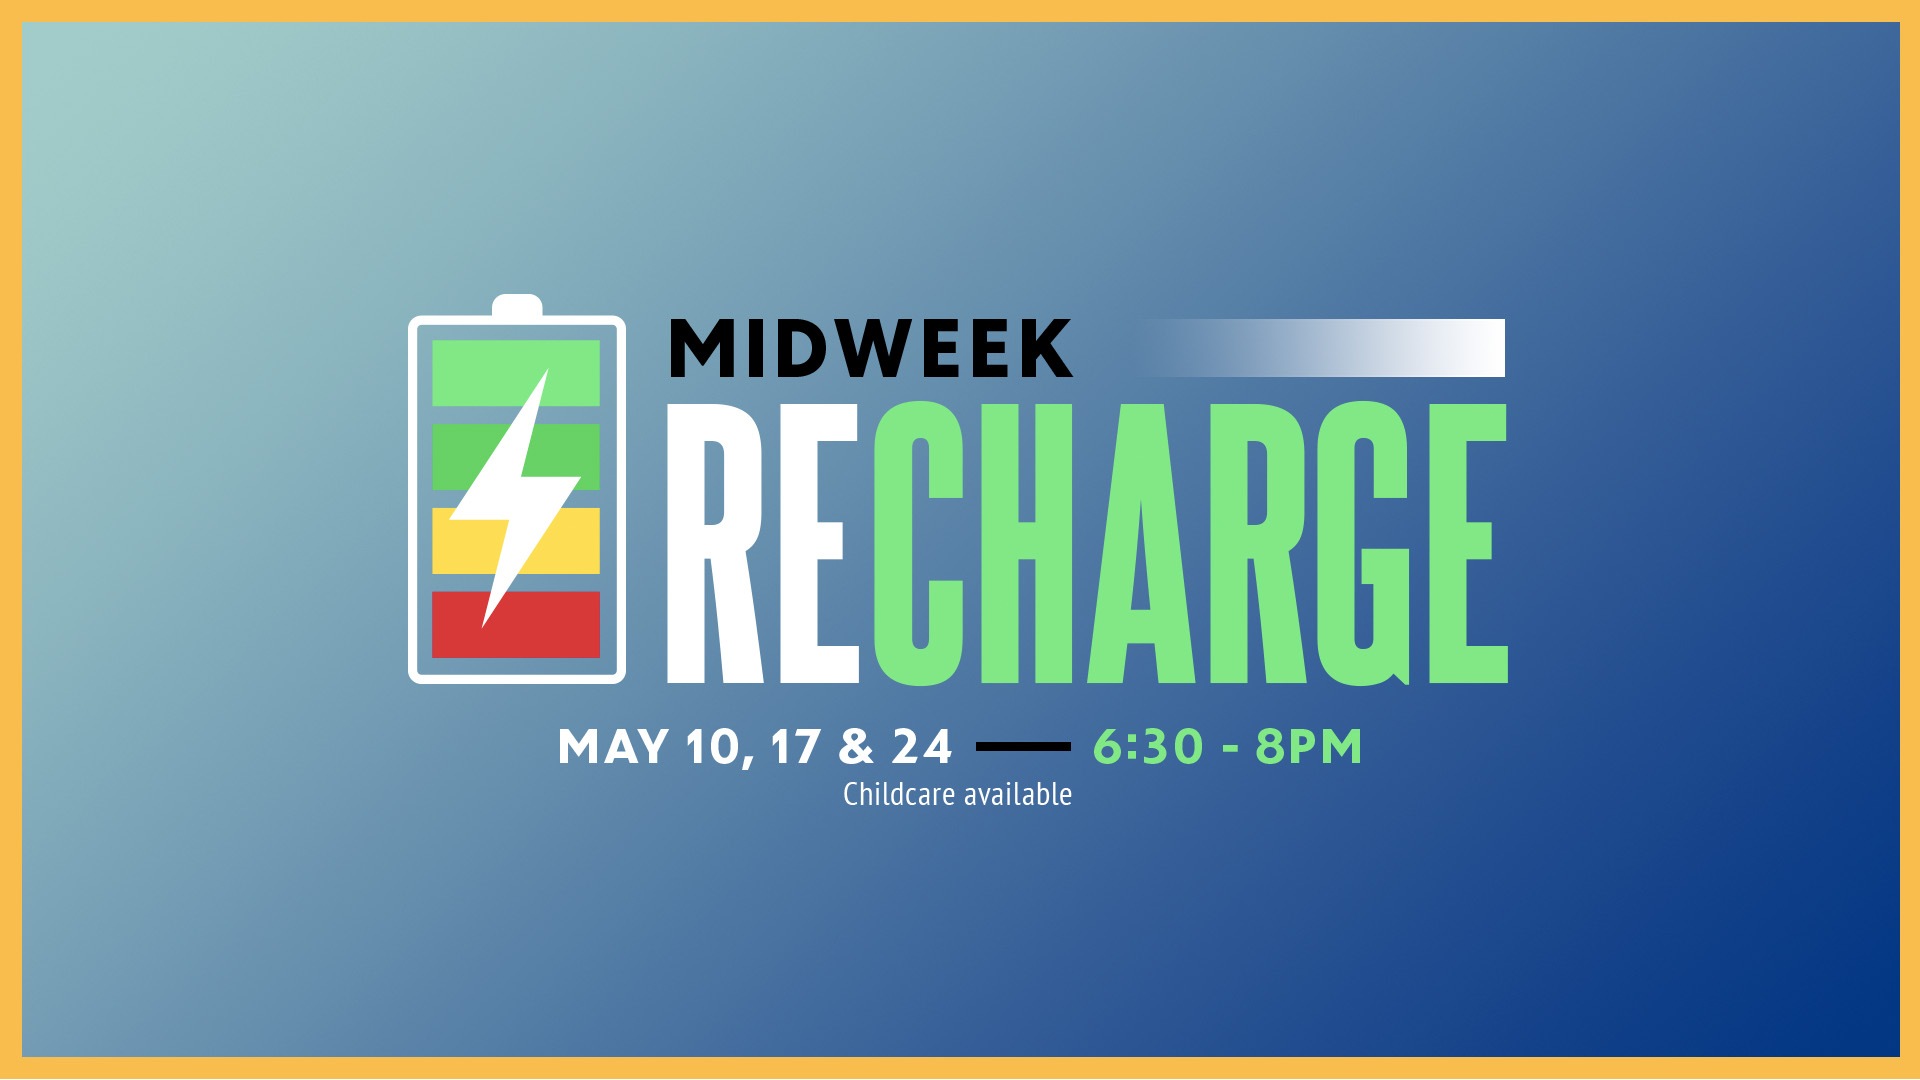 MH Midweek Recharge 1920 x 1080